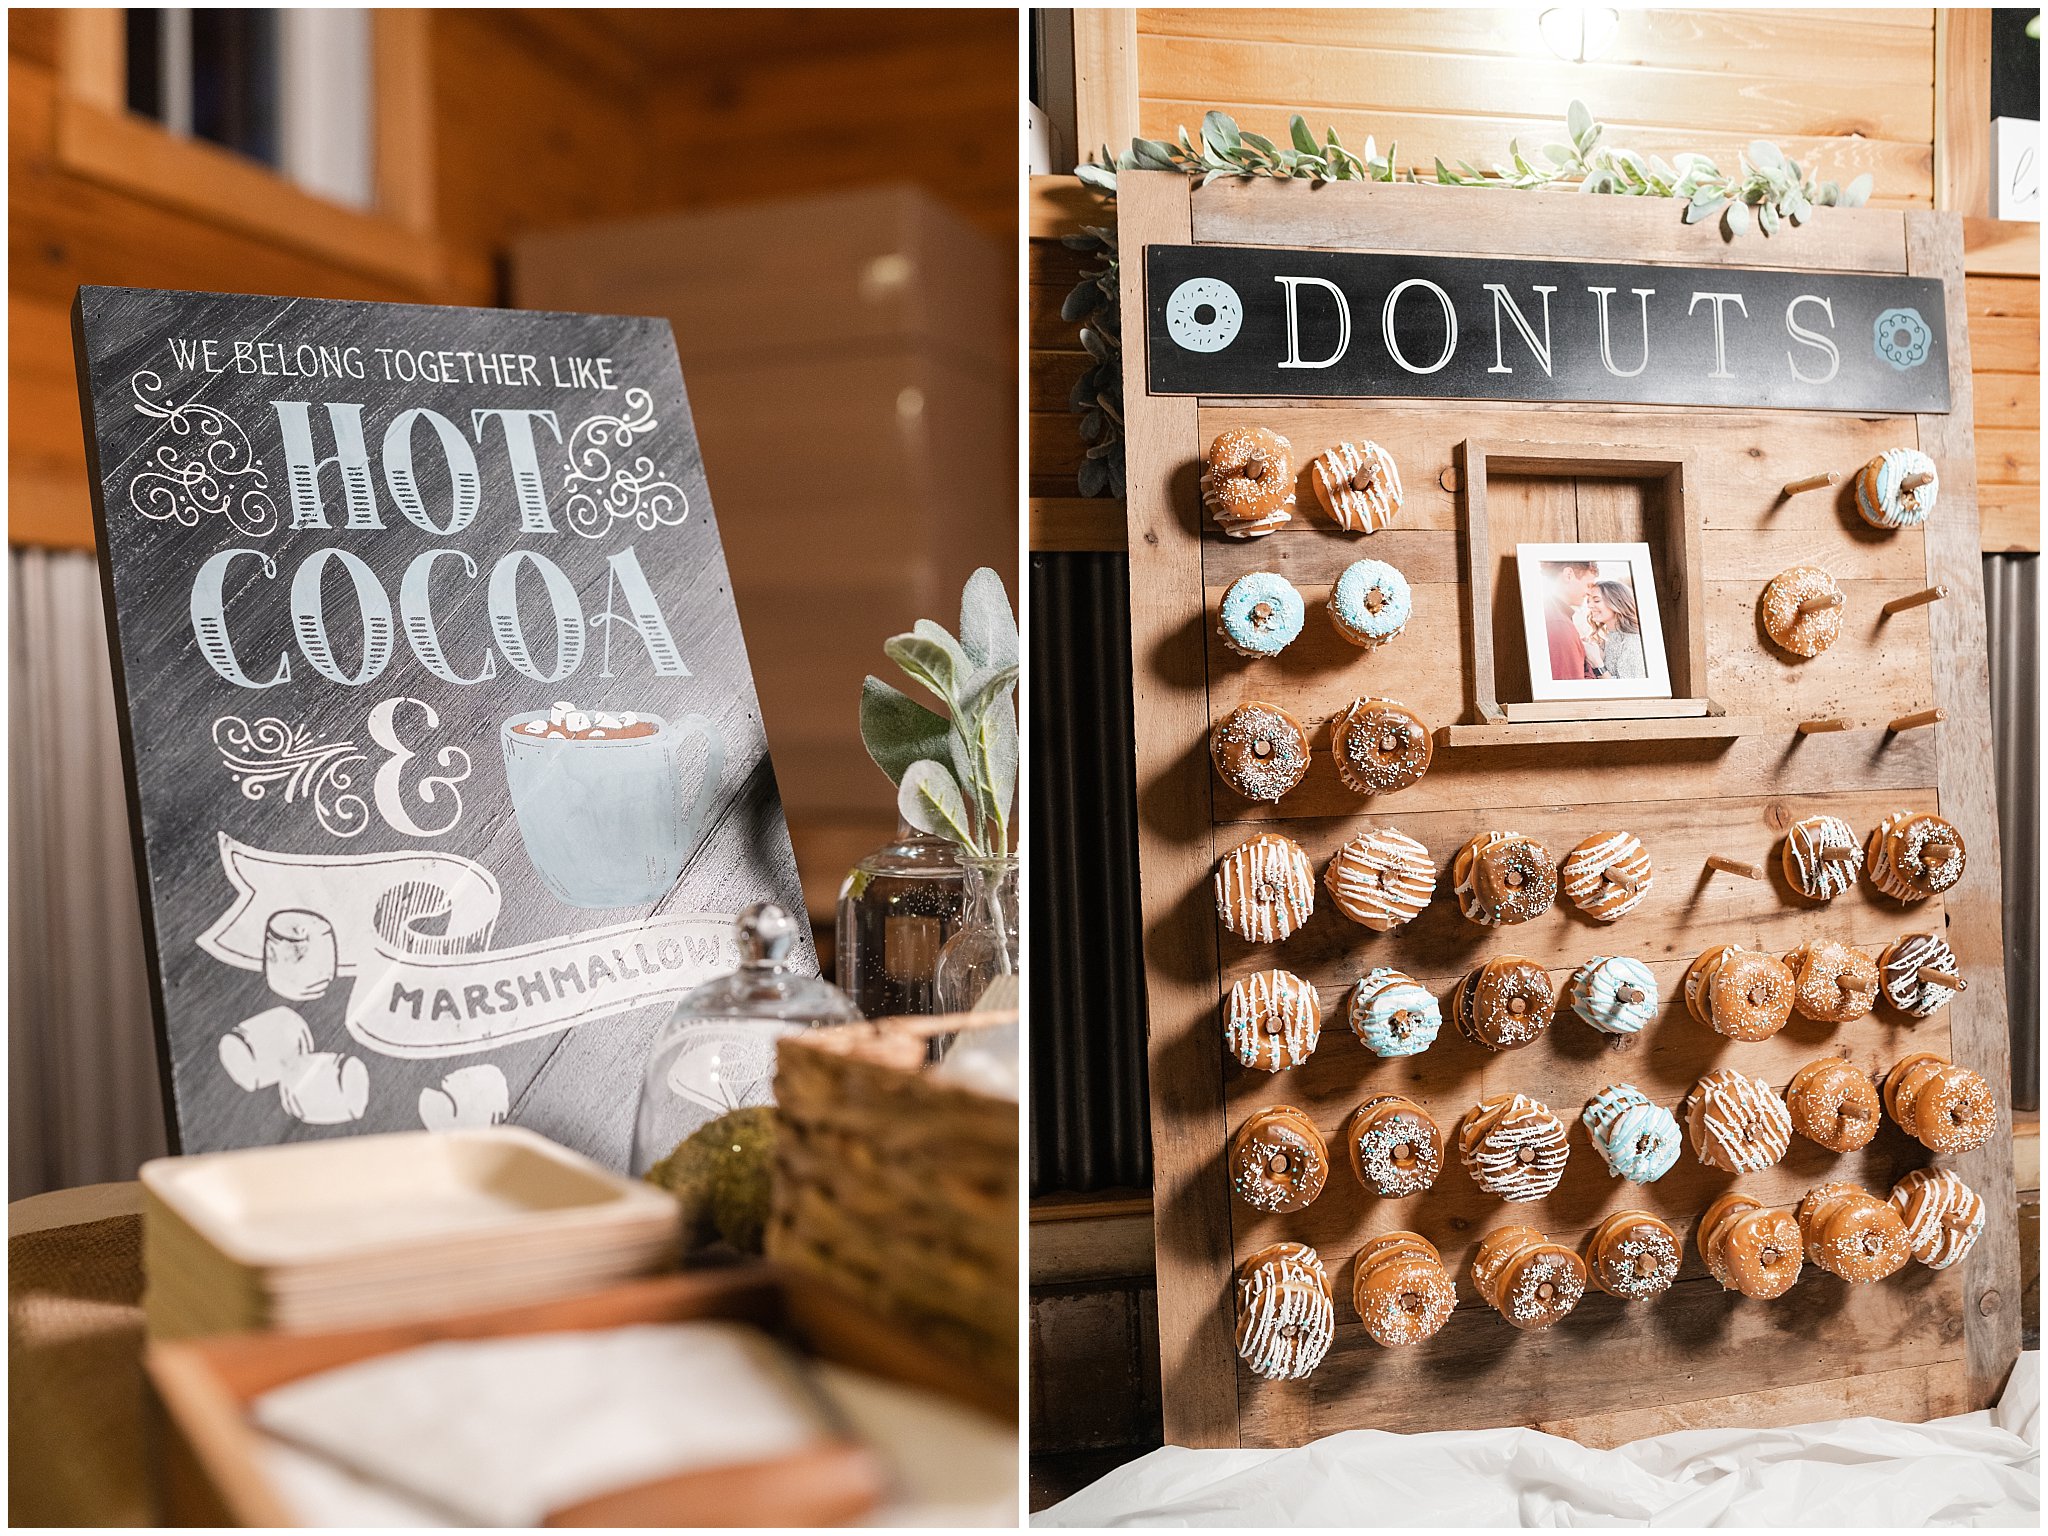 Reception details with wooden donut wall, and chalk board hot cocoa sign | Oquirrh Mountain Temple and Draper Day Barn Winter Wedding | Jessie and Dallin Photography